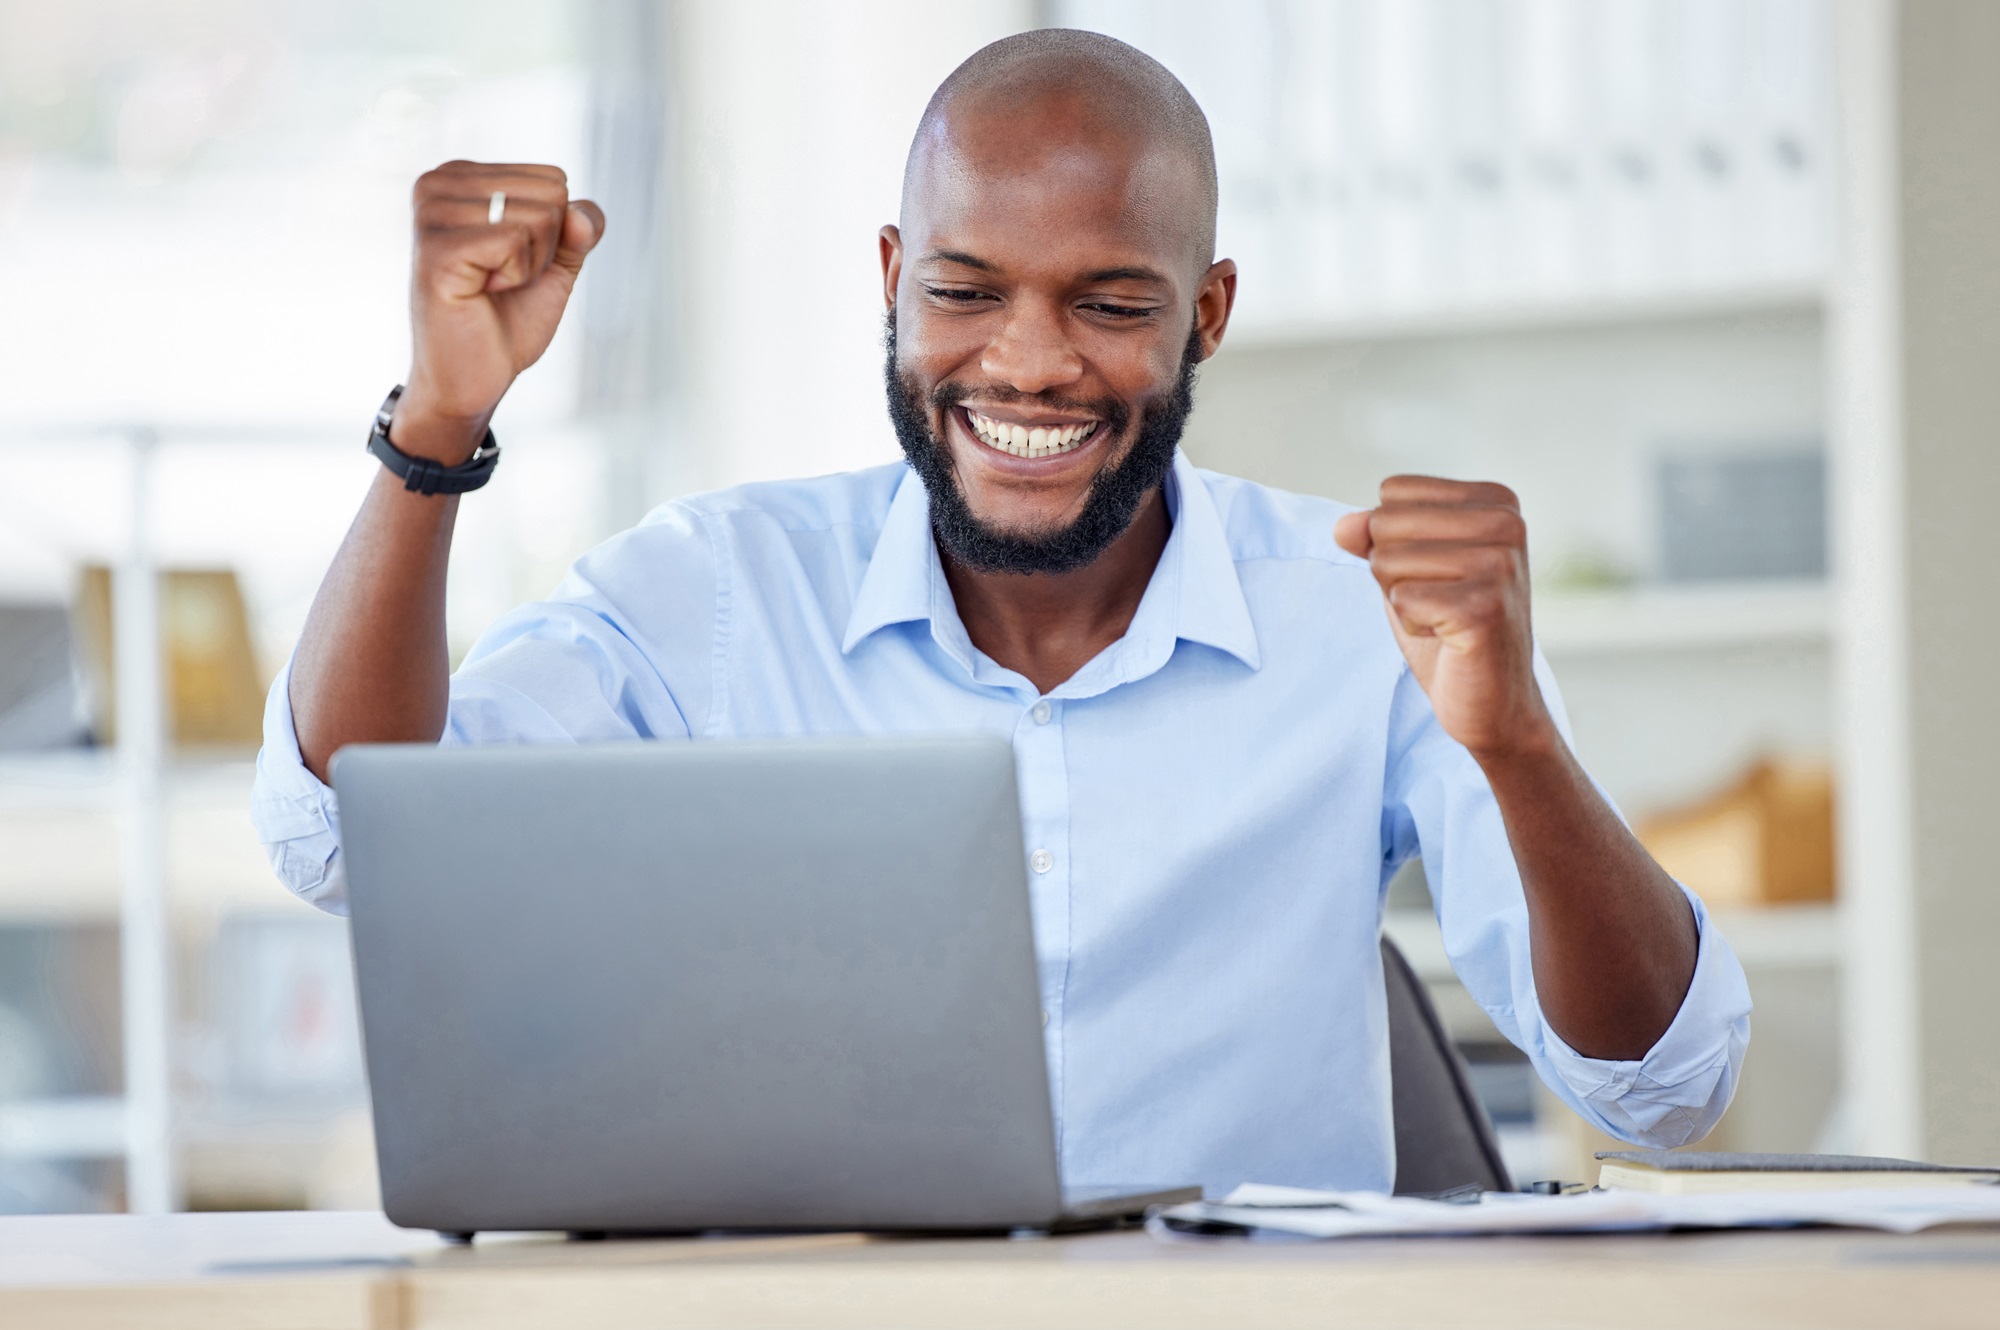 A Man is Cheering in Front of a Laptop by Lifting his Both Fists